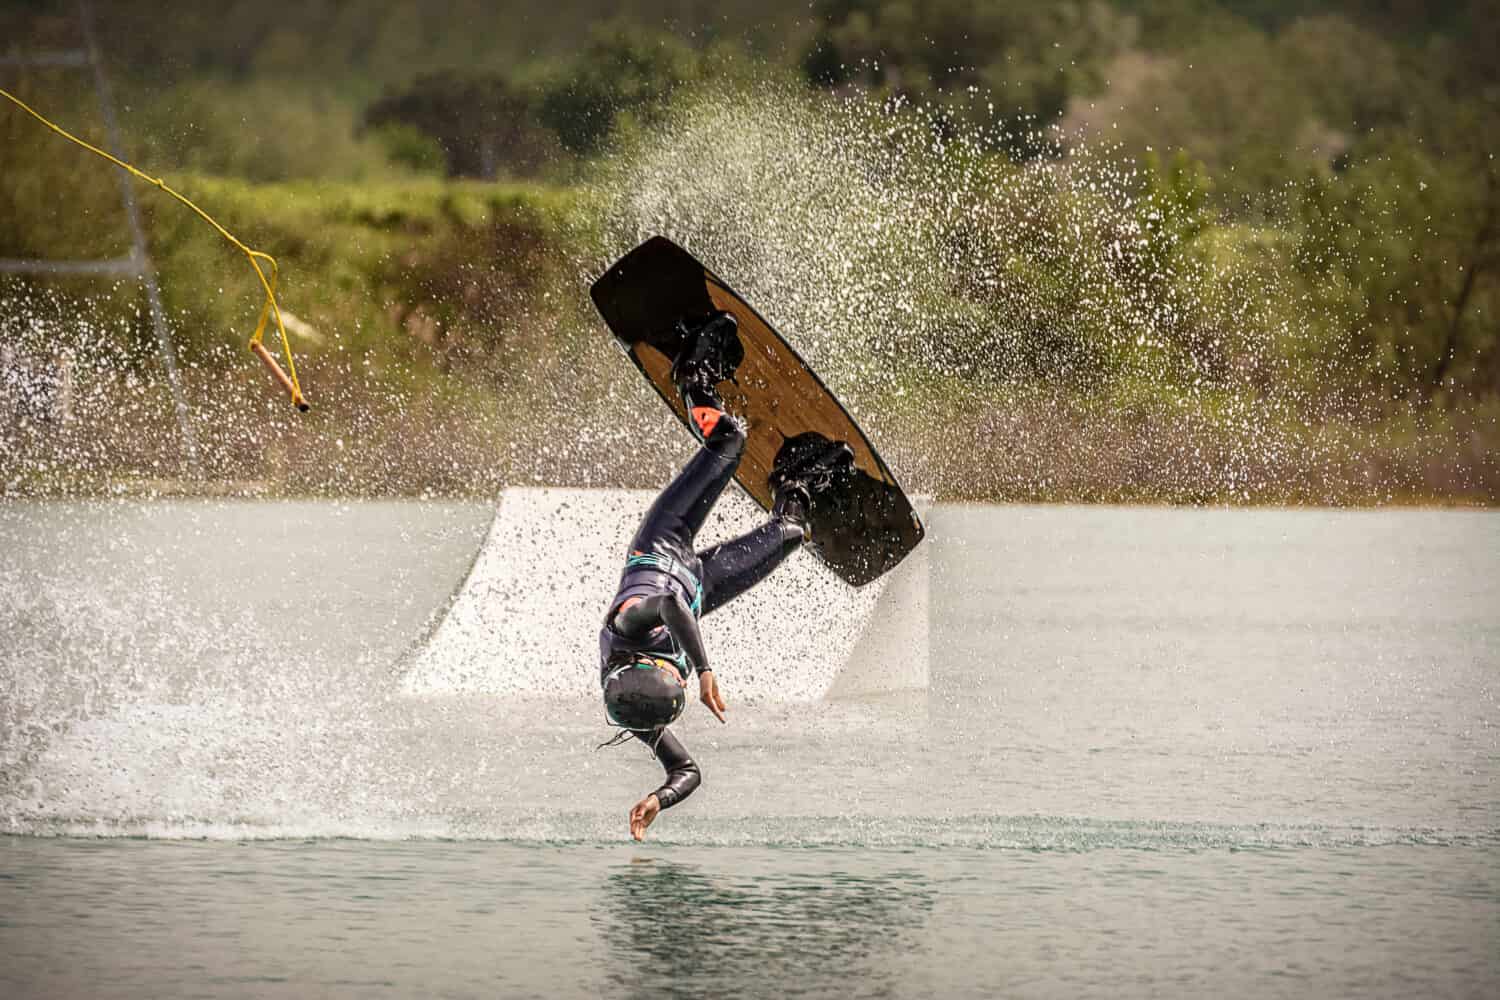 Athlete Woman is crashing with Wakeboard at the Cable Park